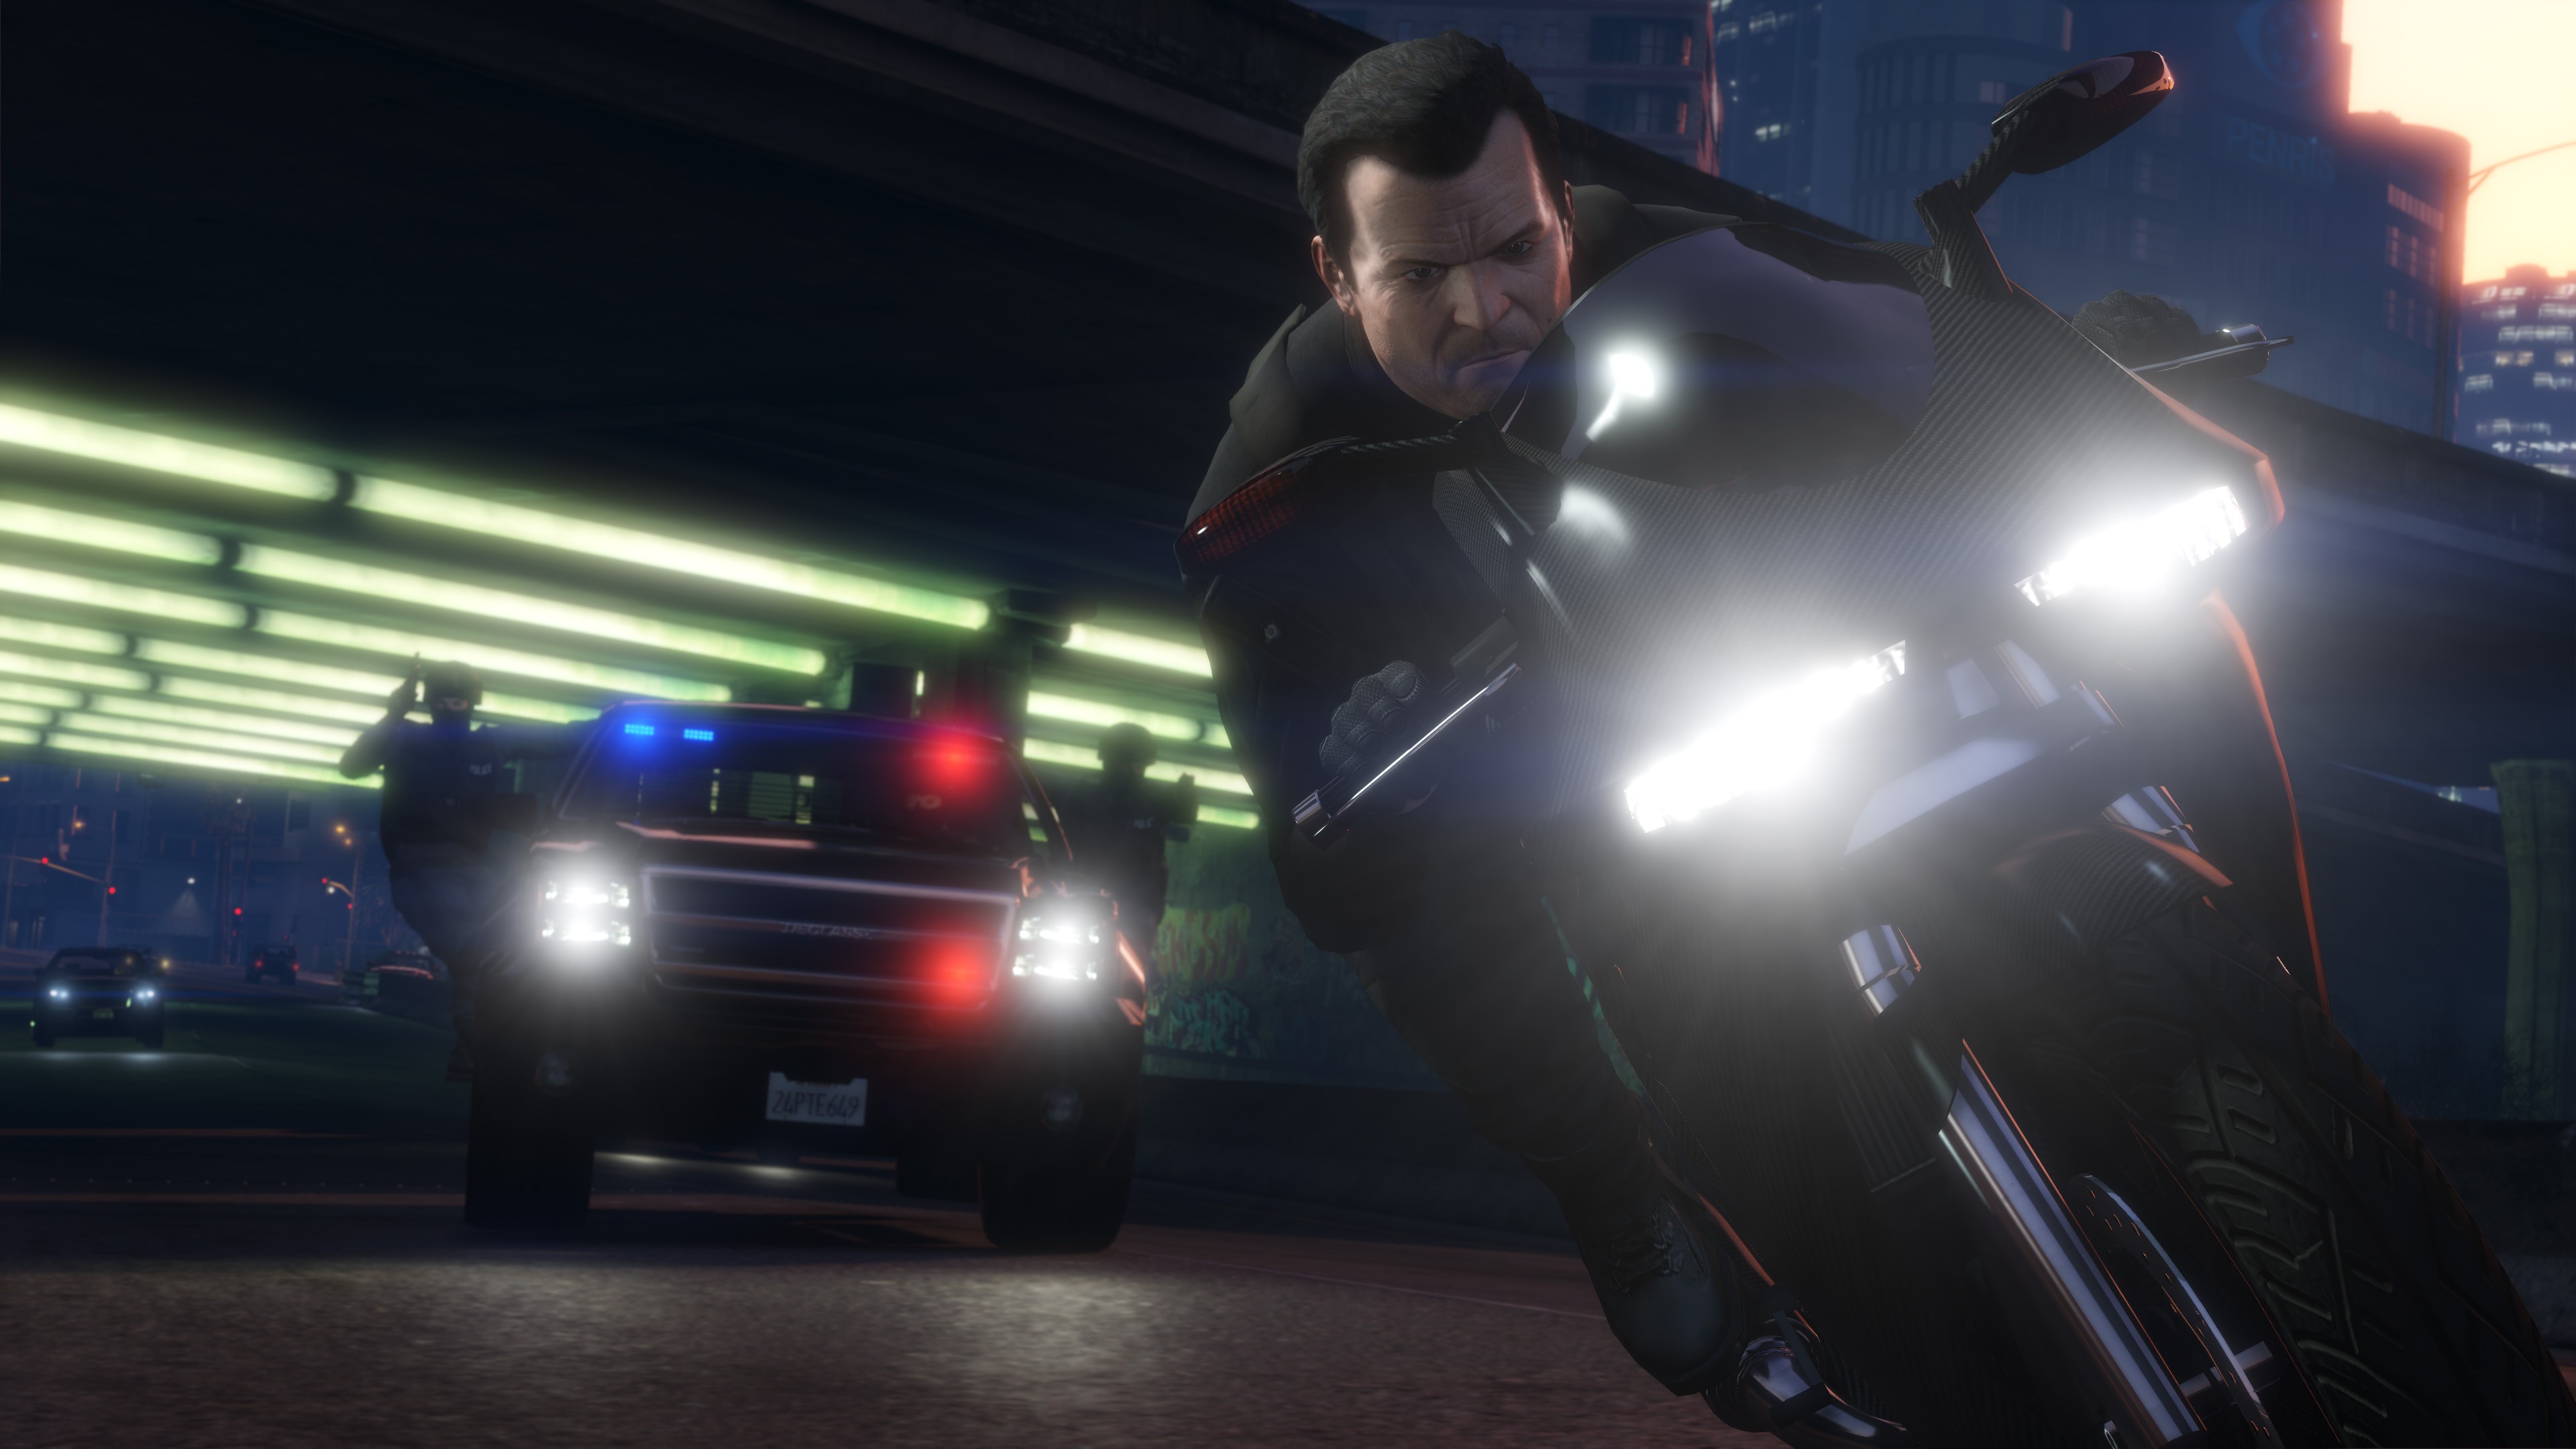 Grand Theft Auto V Pursuit Video Games Motorcycle Police Vehicle 3840x2160